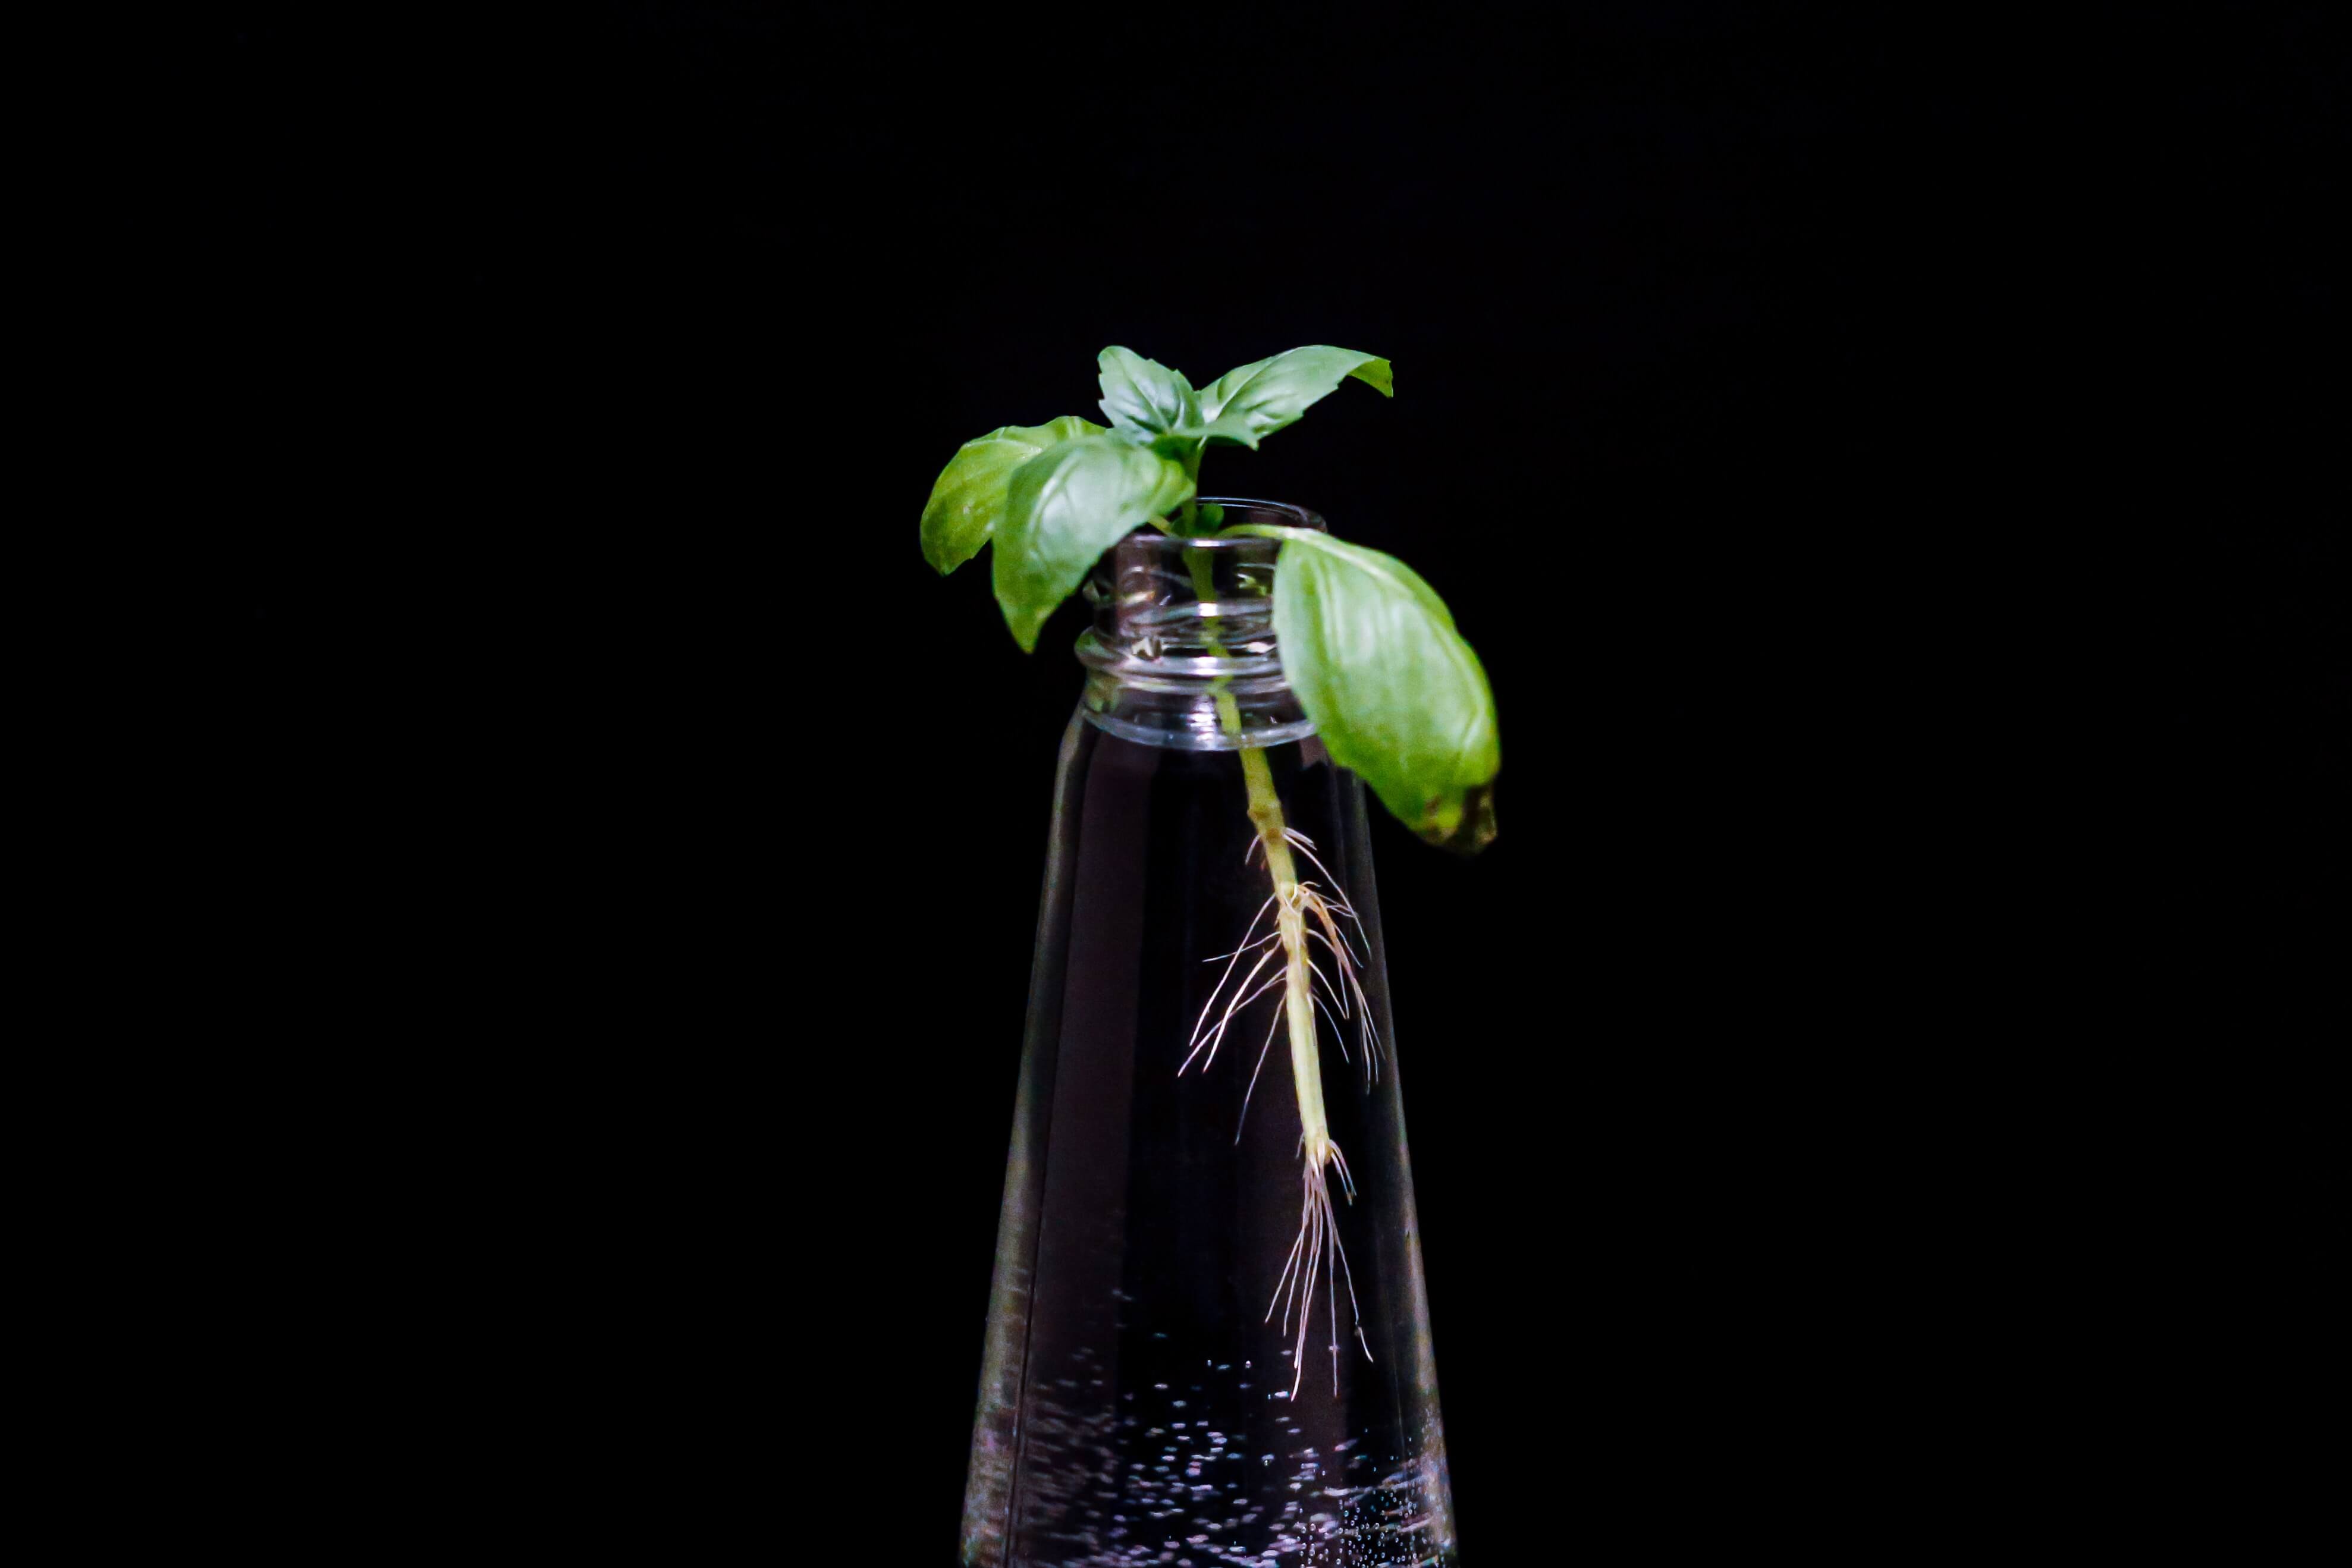 Basil plant rooted in water